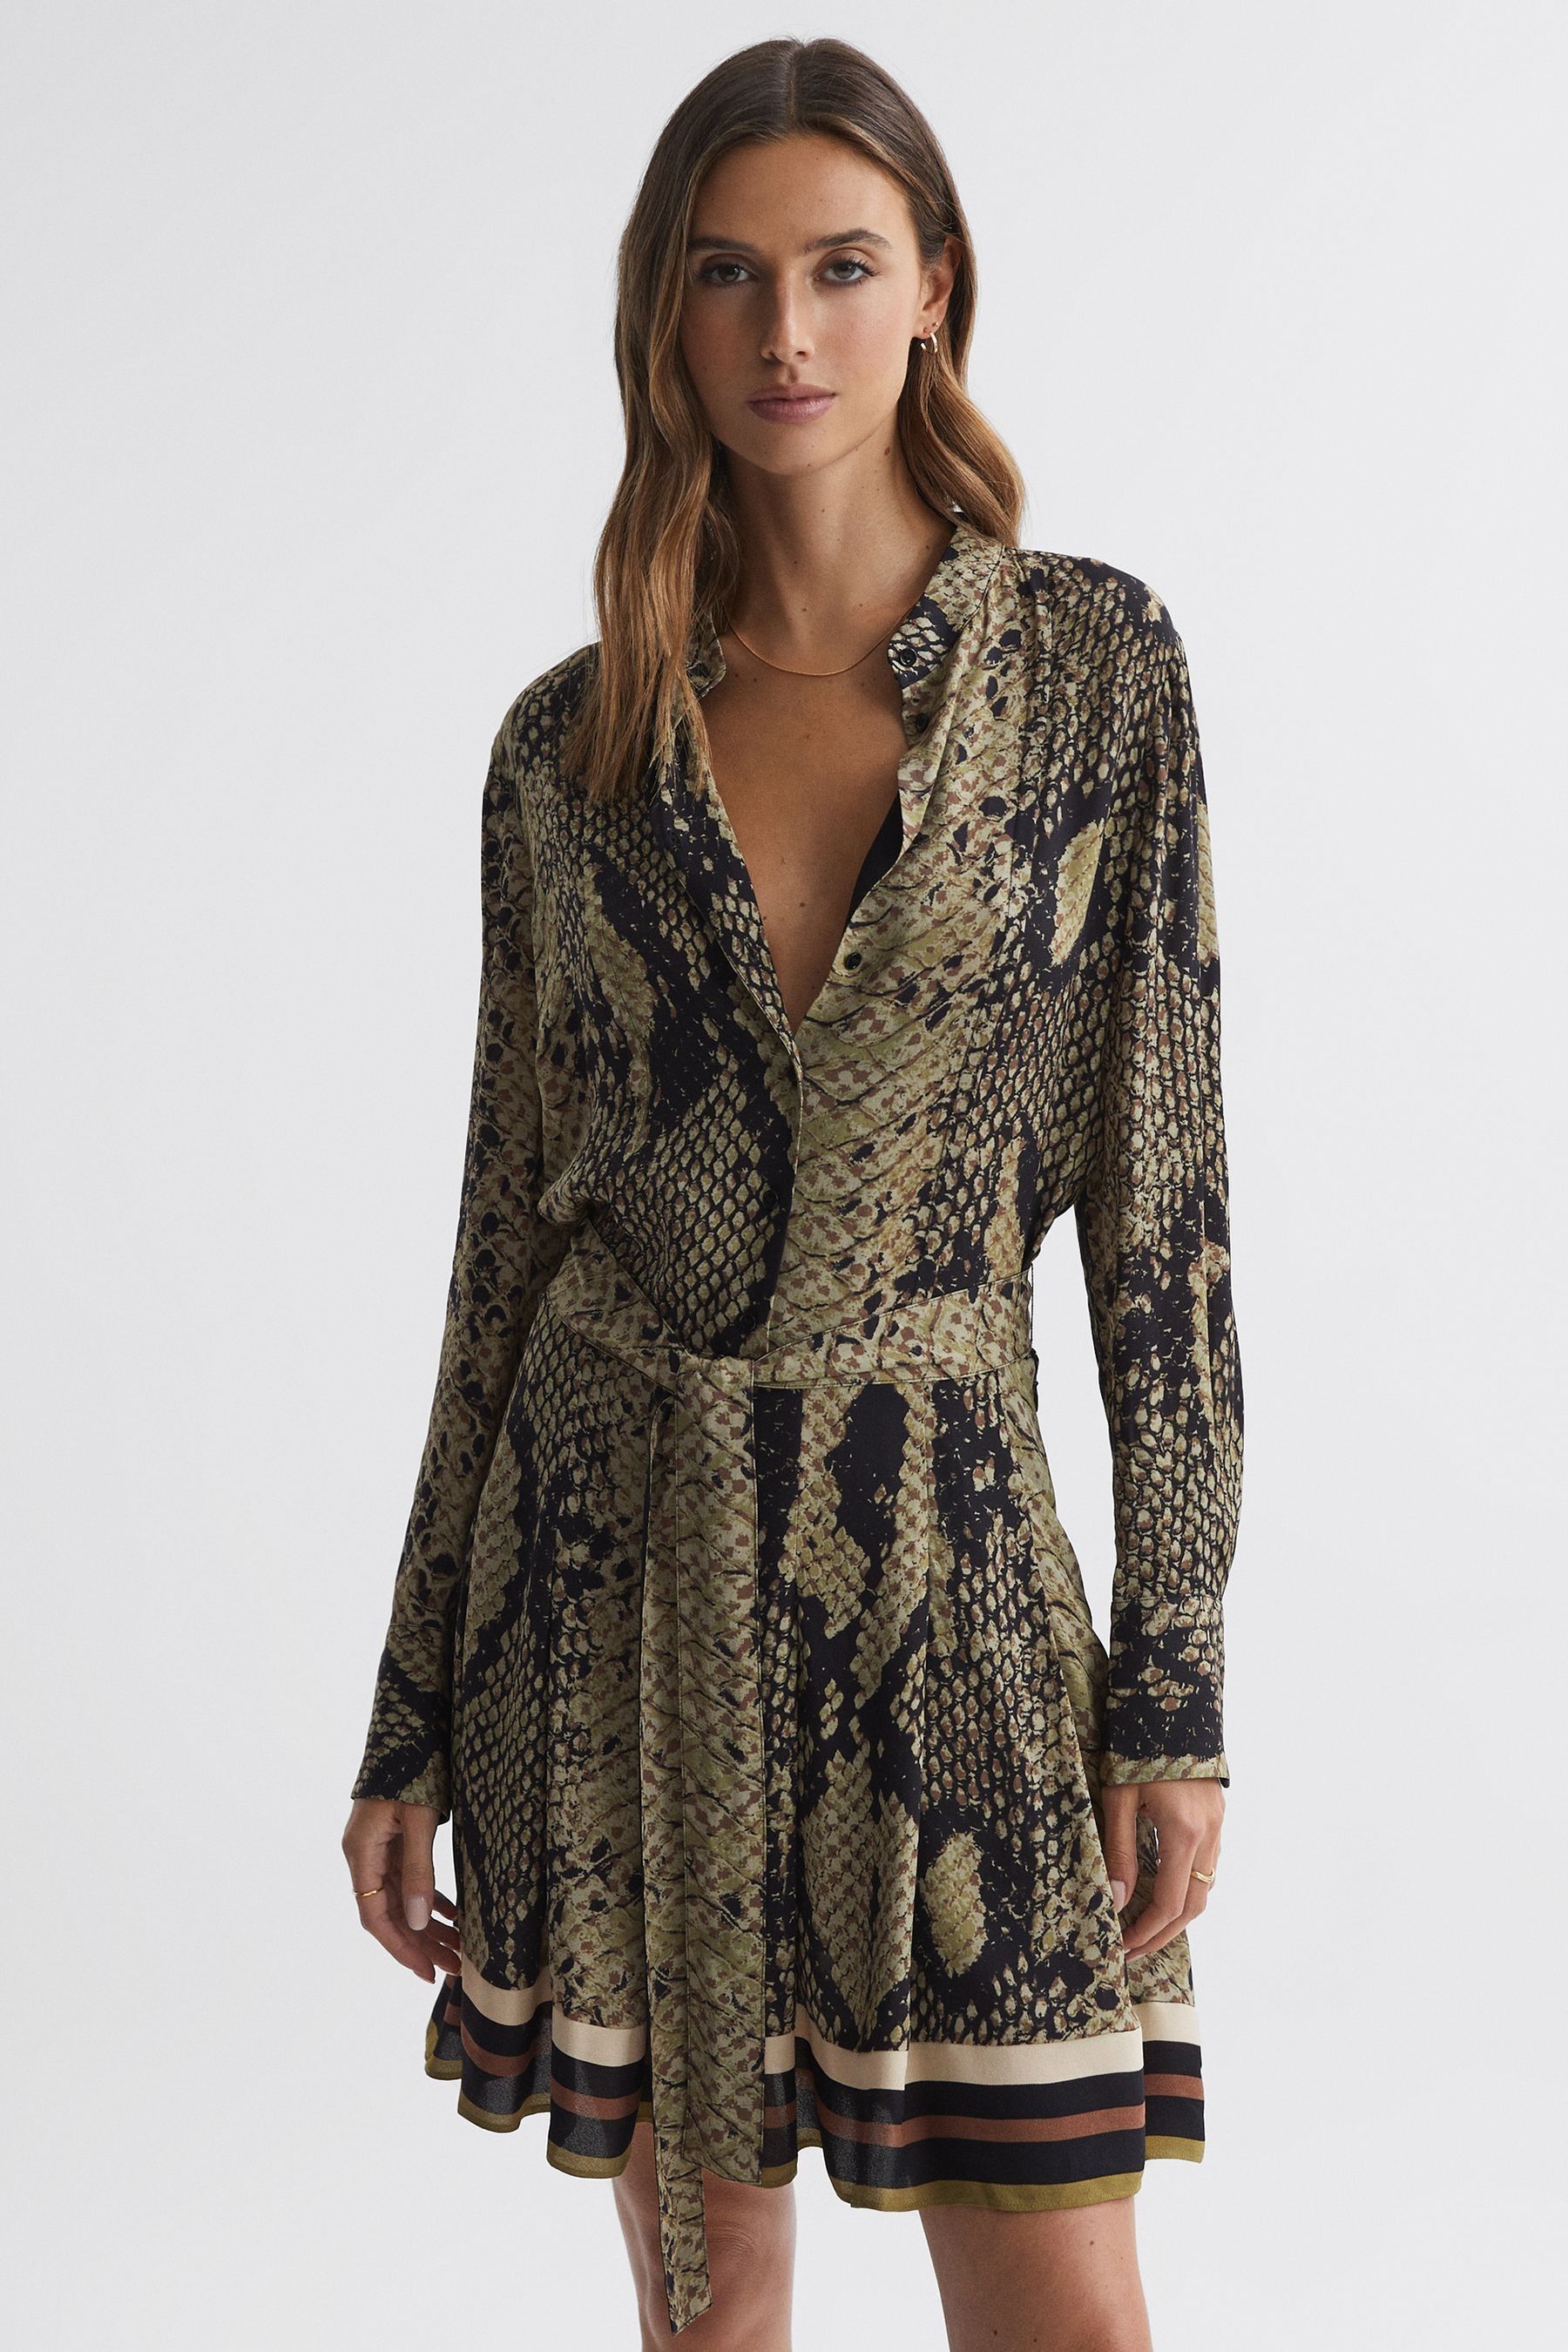 REISS RORY - BROWN SNAKE PRINT BELTED MINI DRESS, US 8